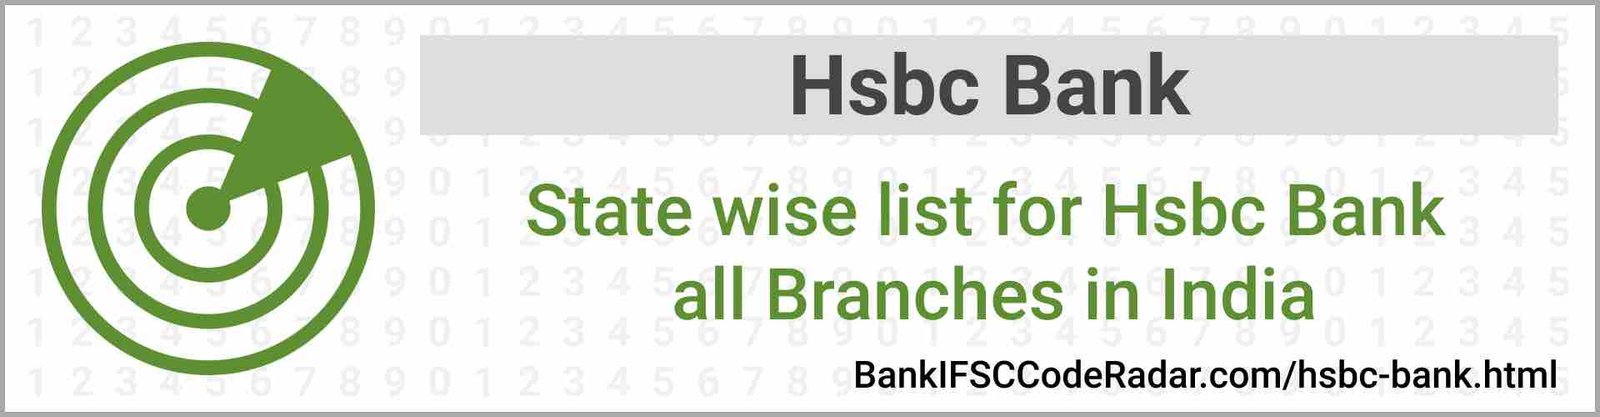 Hsbc Bank All Branches India